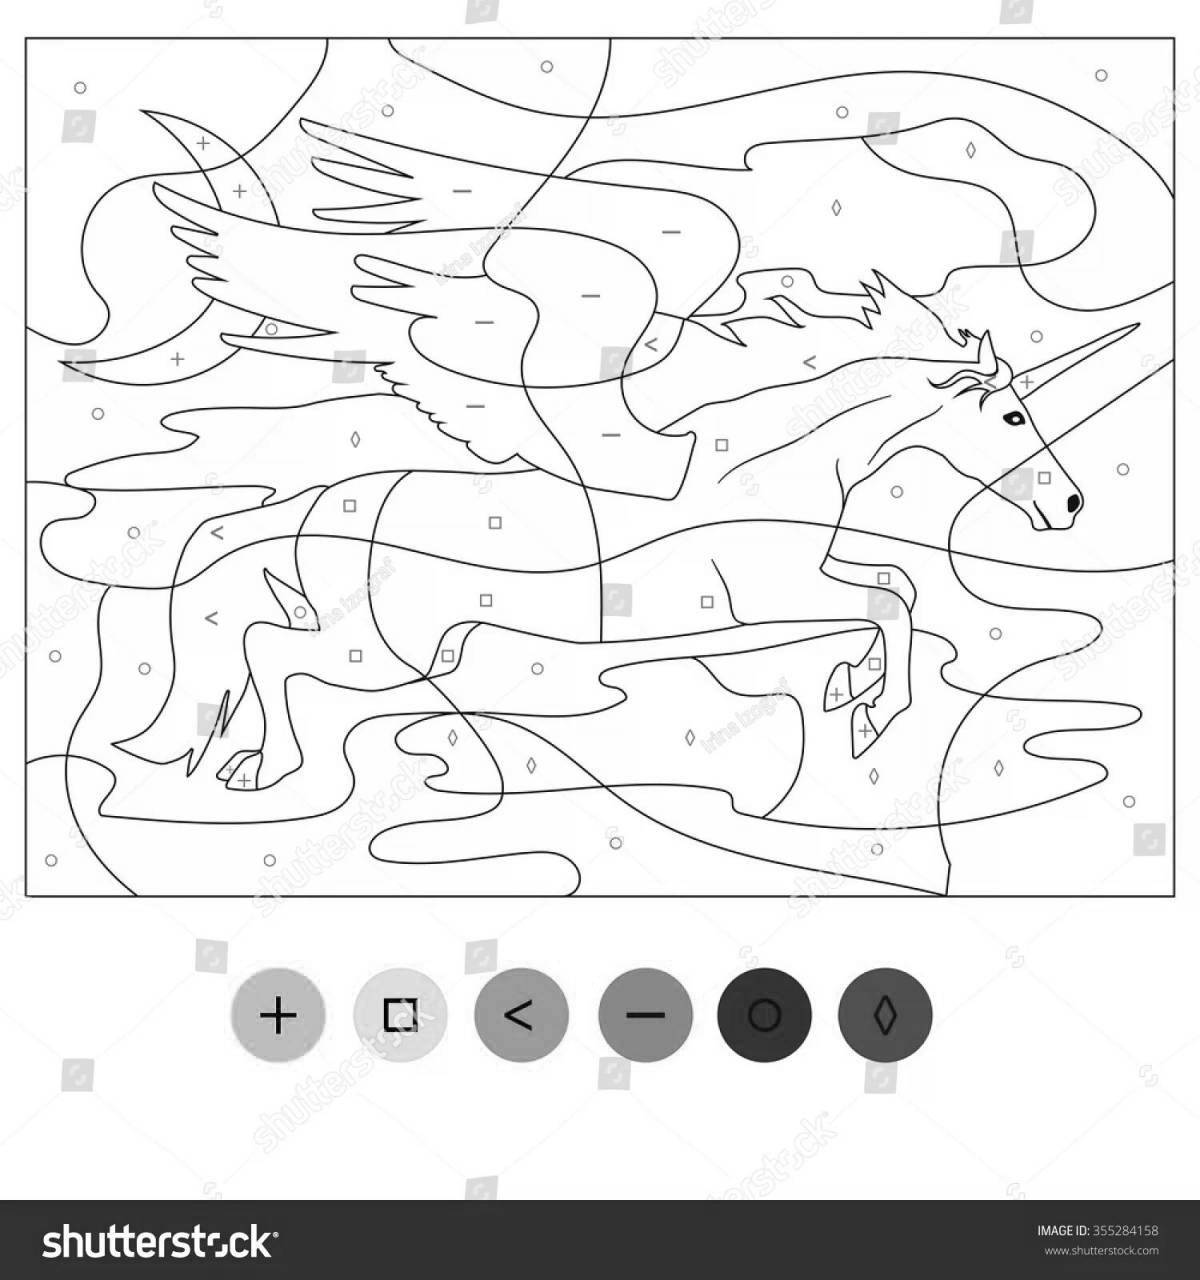 Elegant horse coloring by numbers